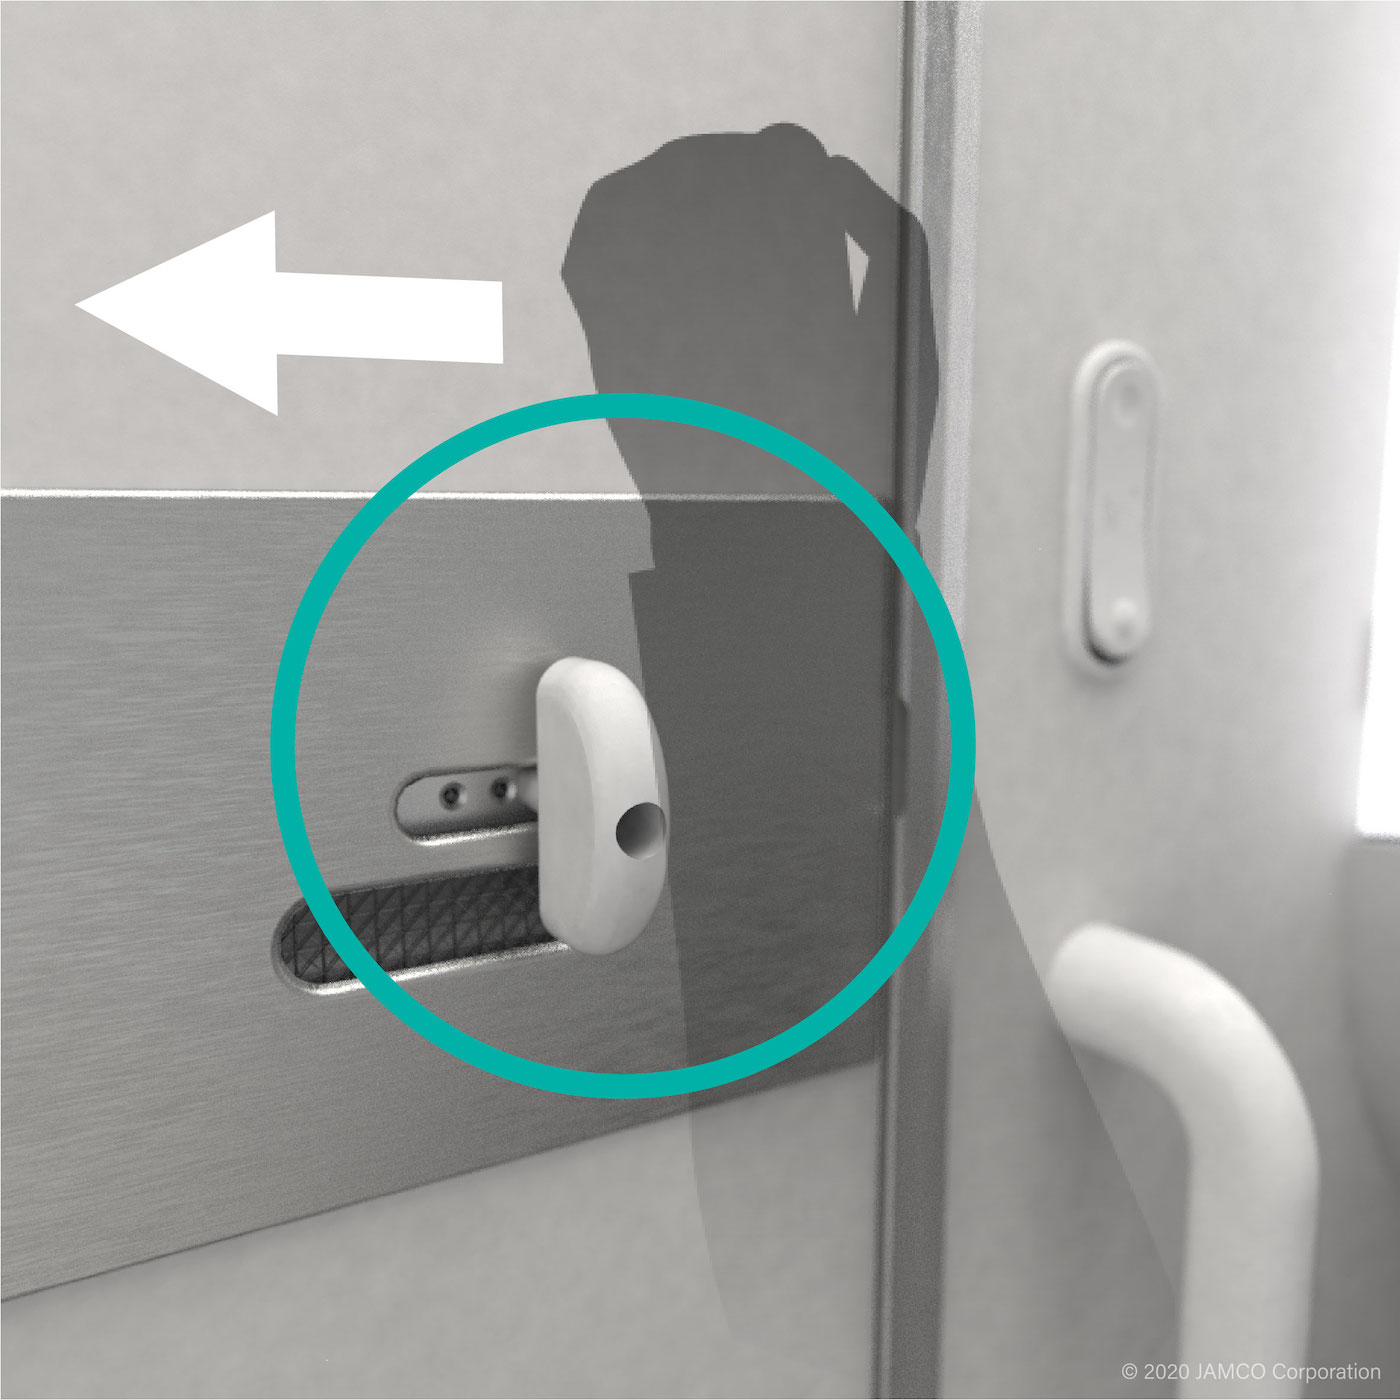 The lavatory door lock knob can also be operated using the forearm